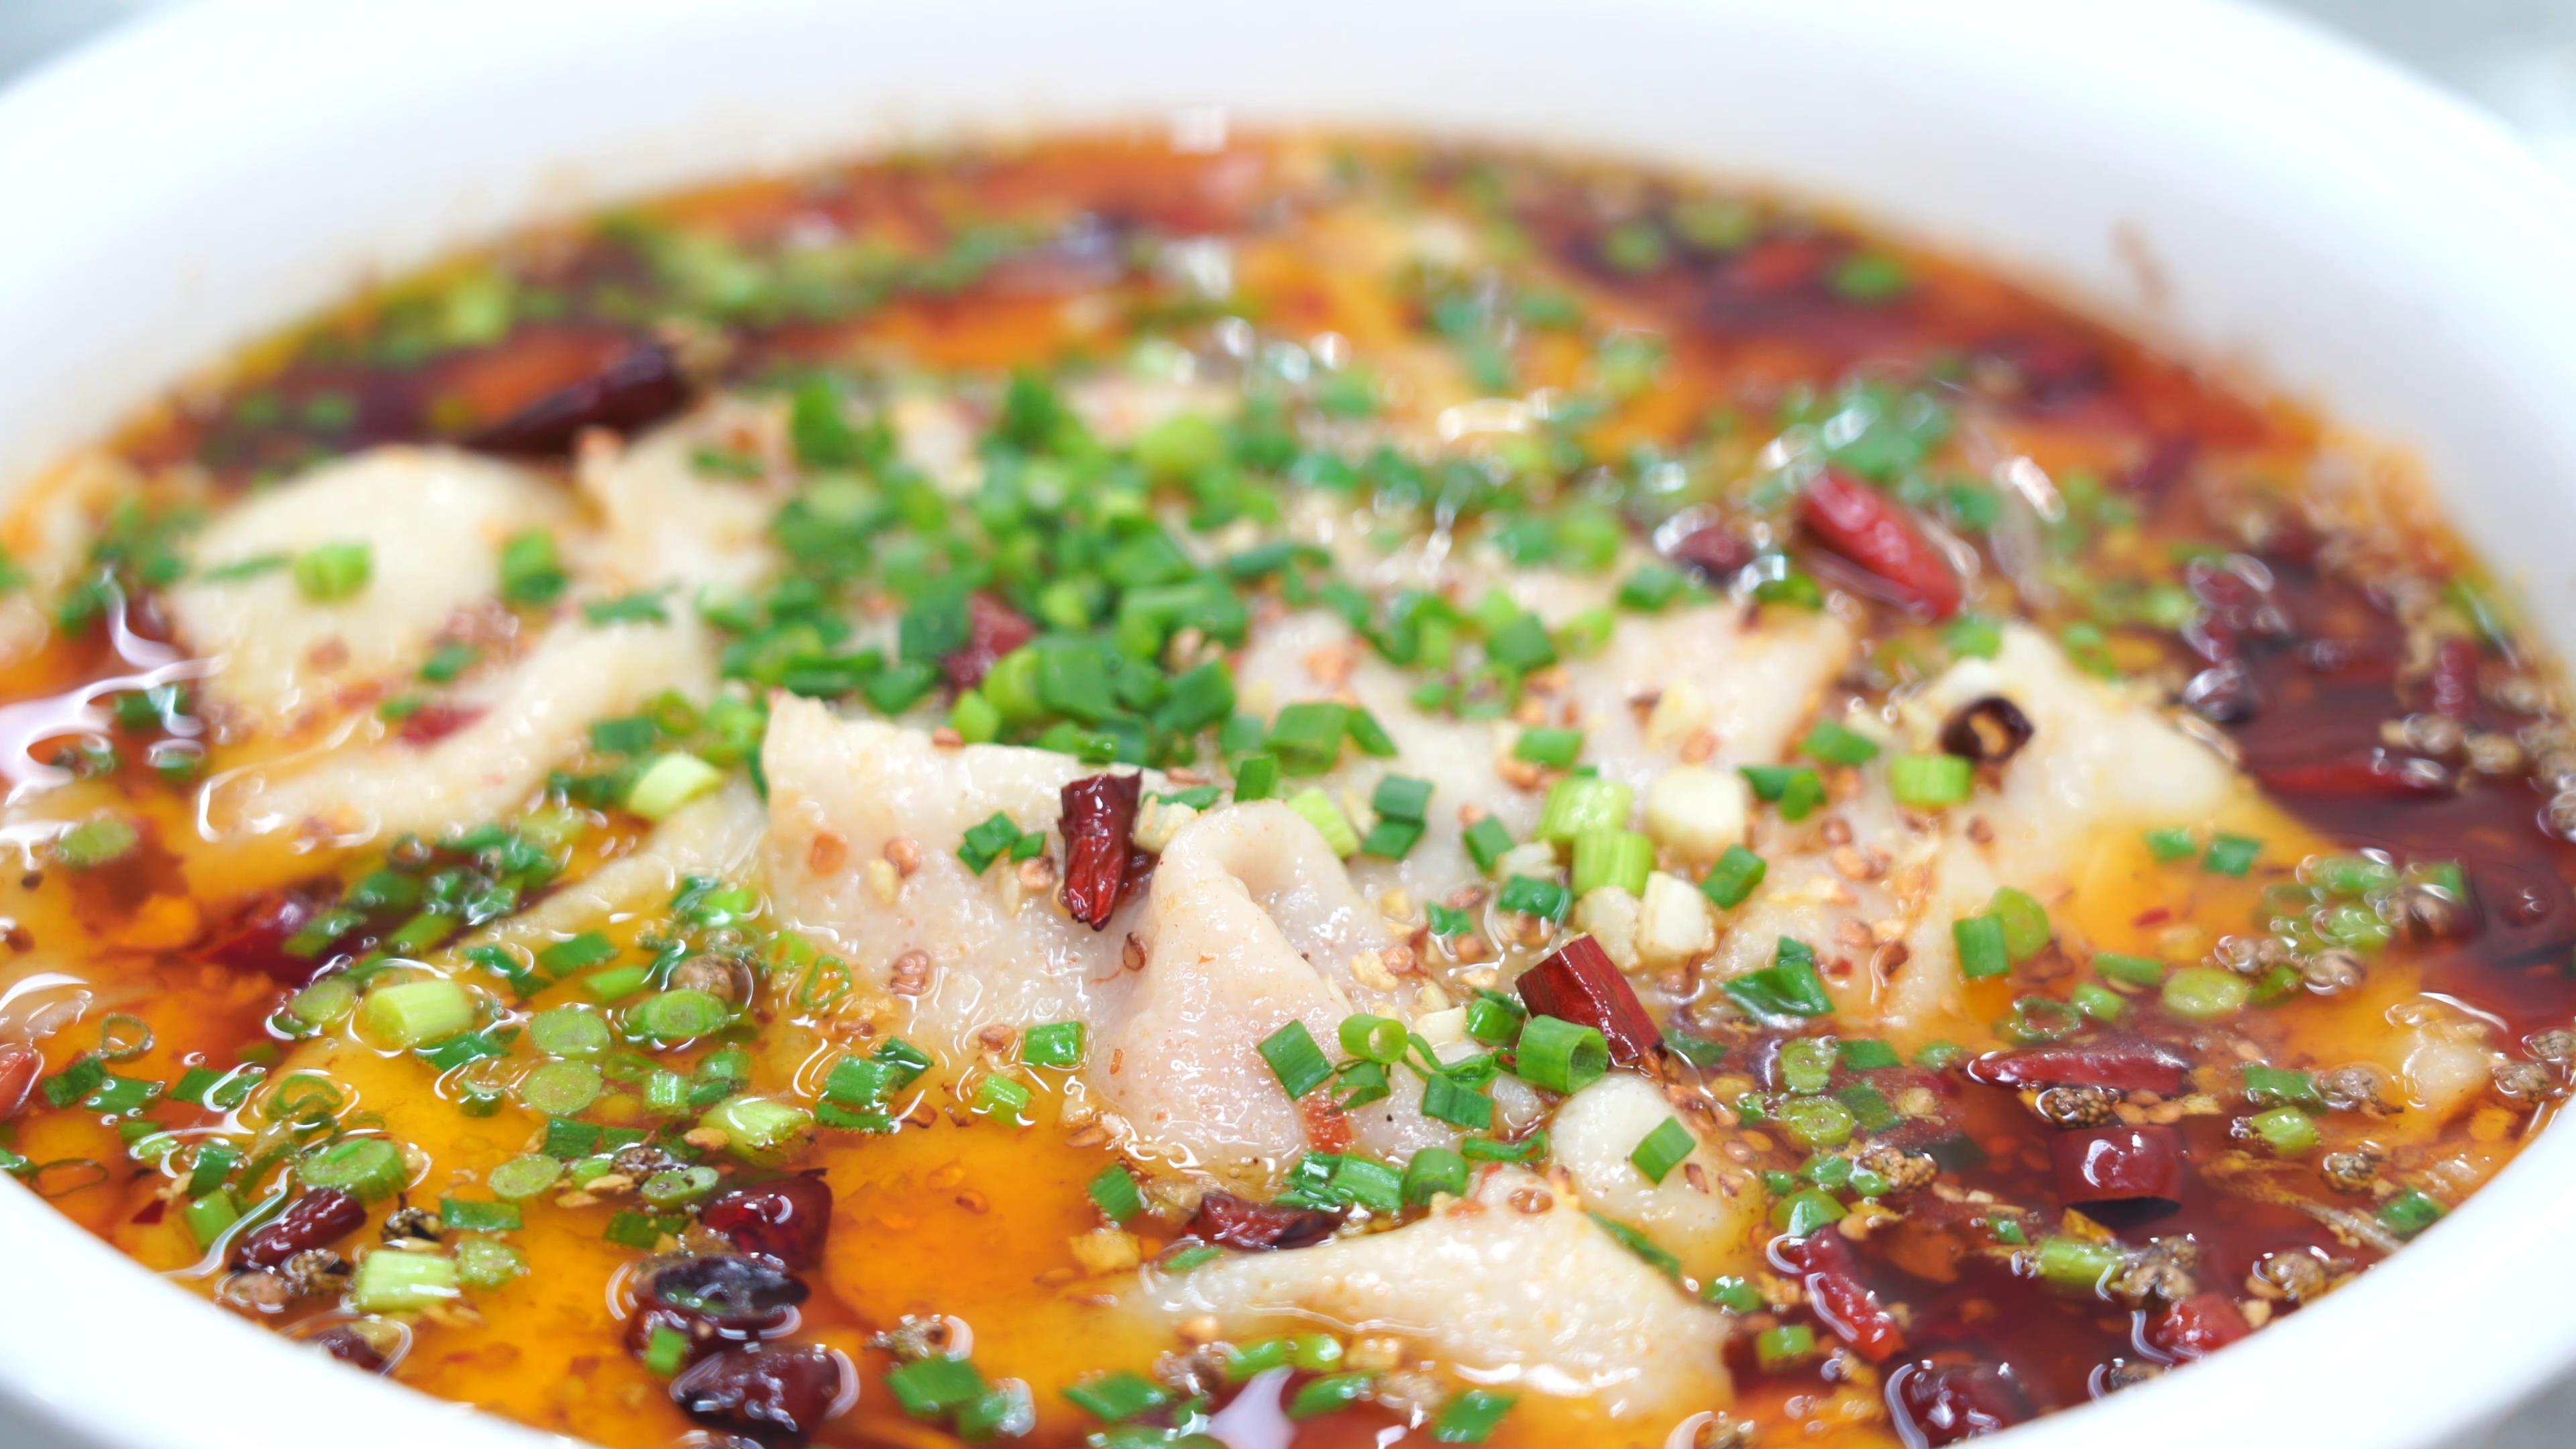 Sichuan Spicy Boiled Chicken 四川水煮鸡片 - COOK COOK GO